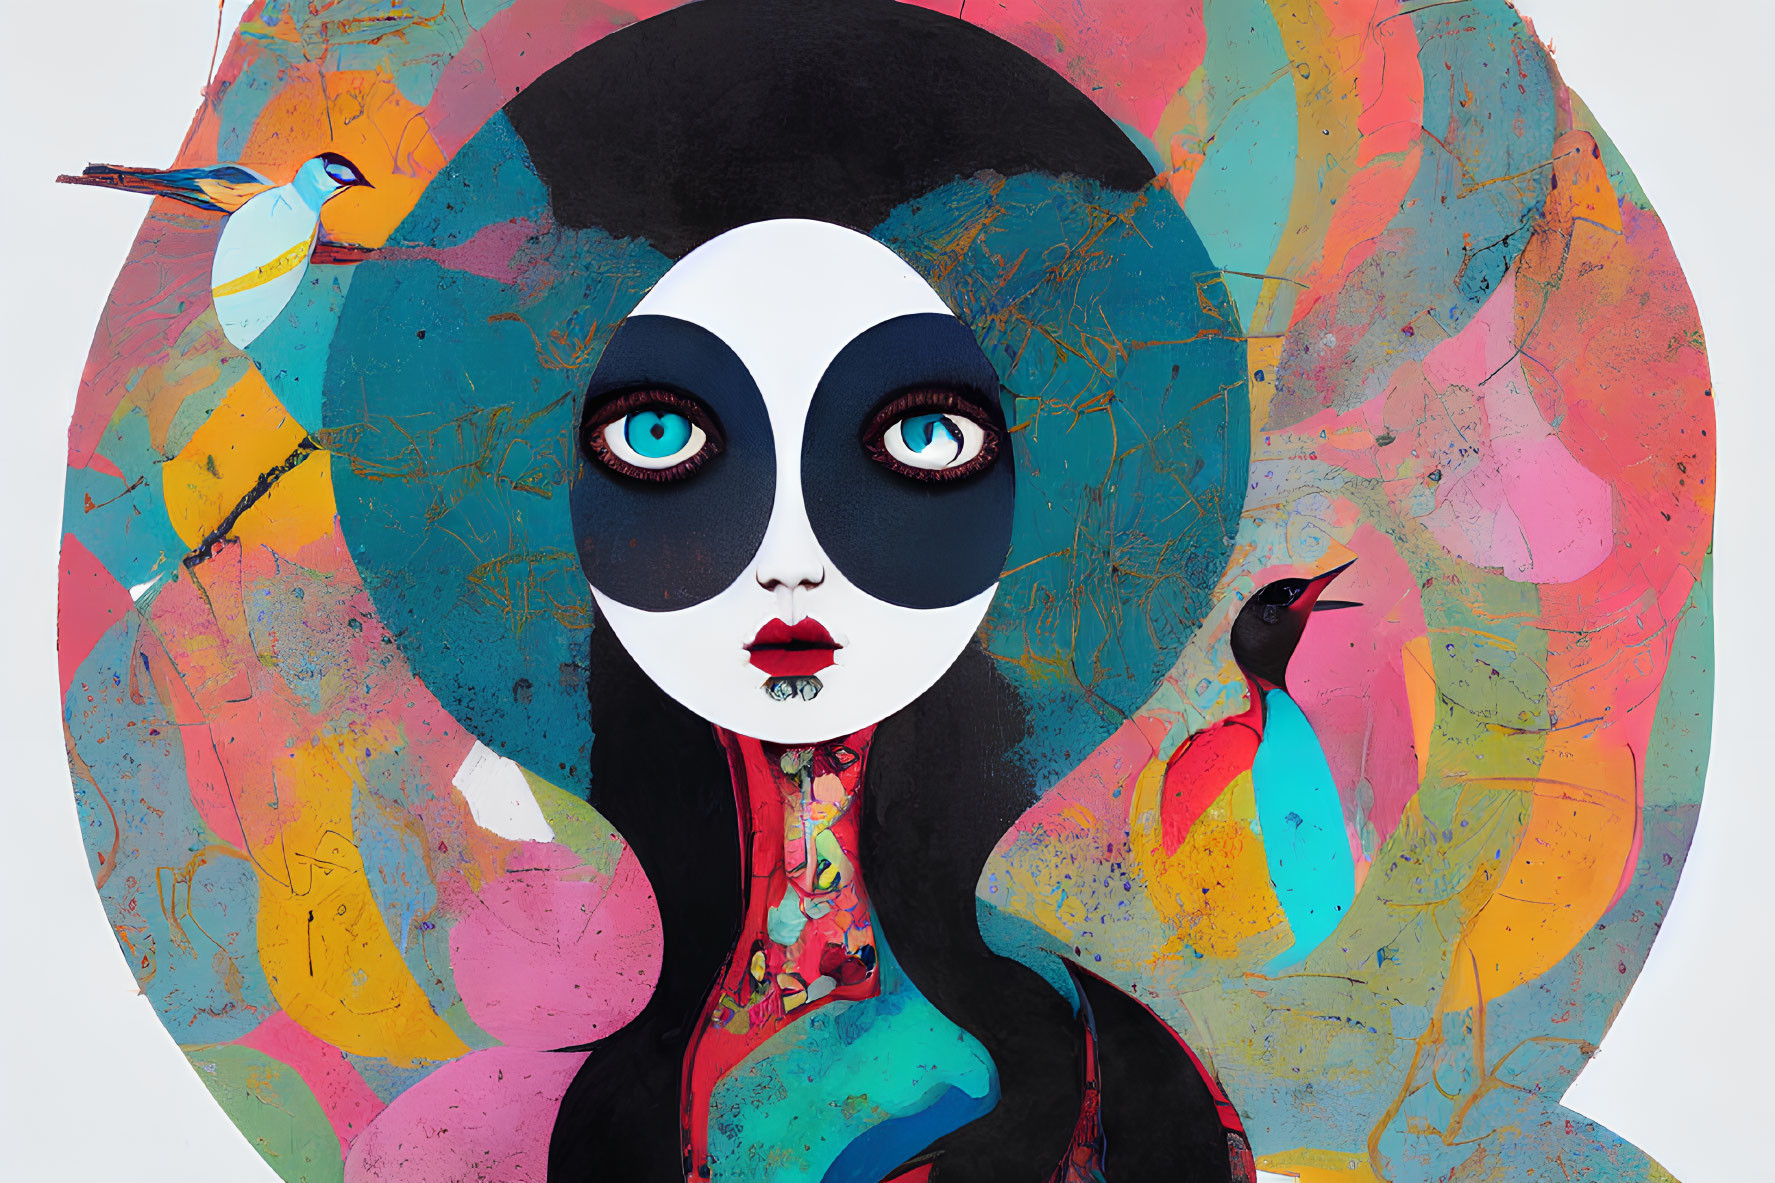 Vibrant digital artwork of stylized woman with dark eyes and abstract patterns